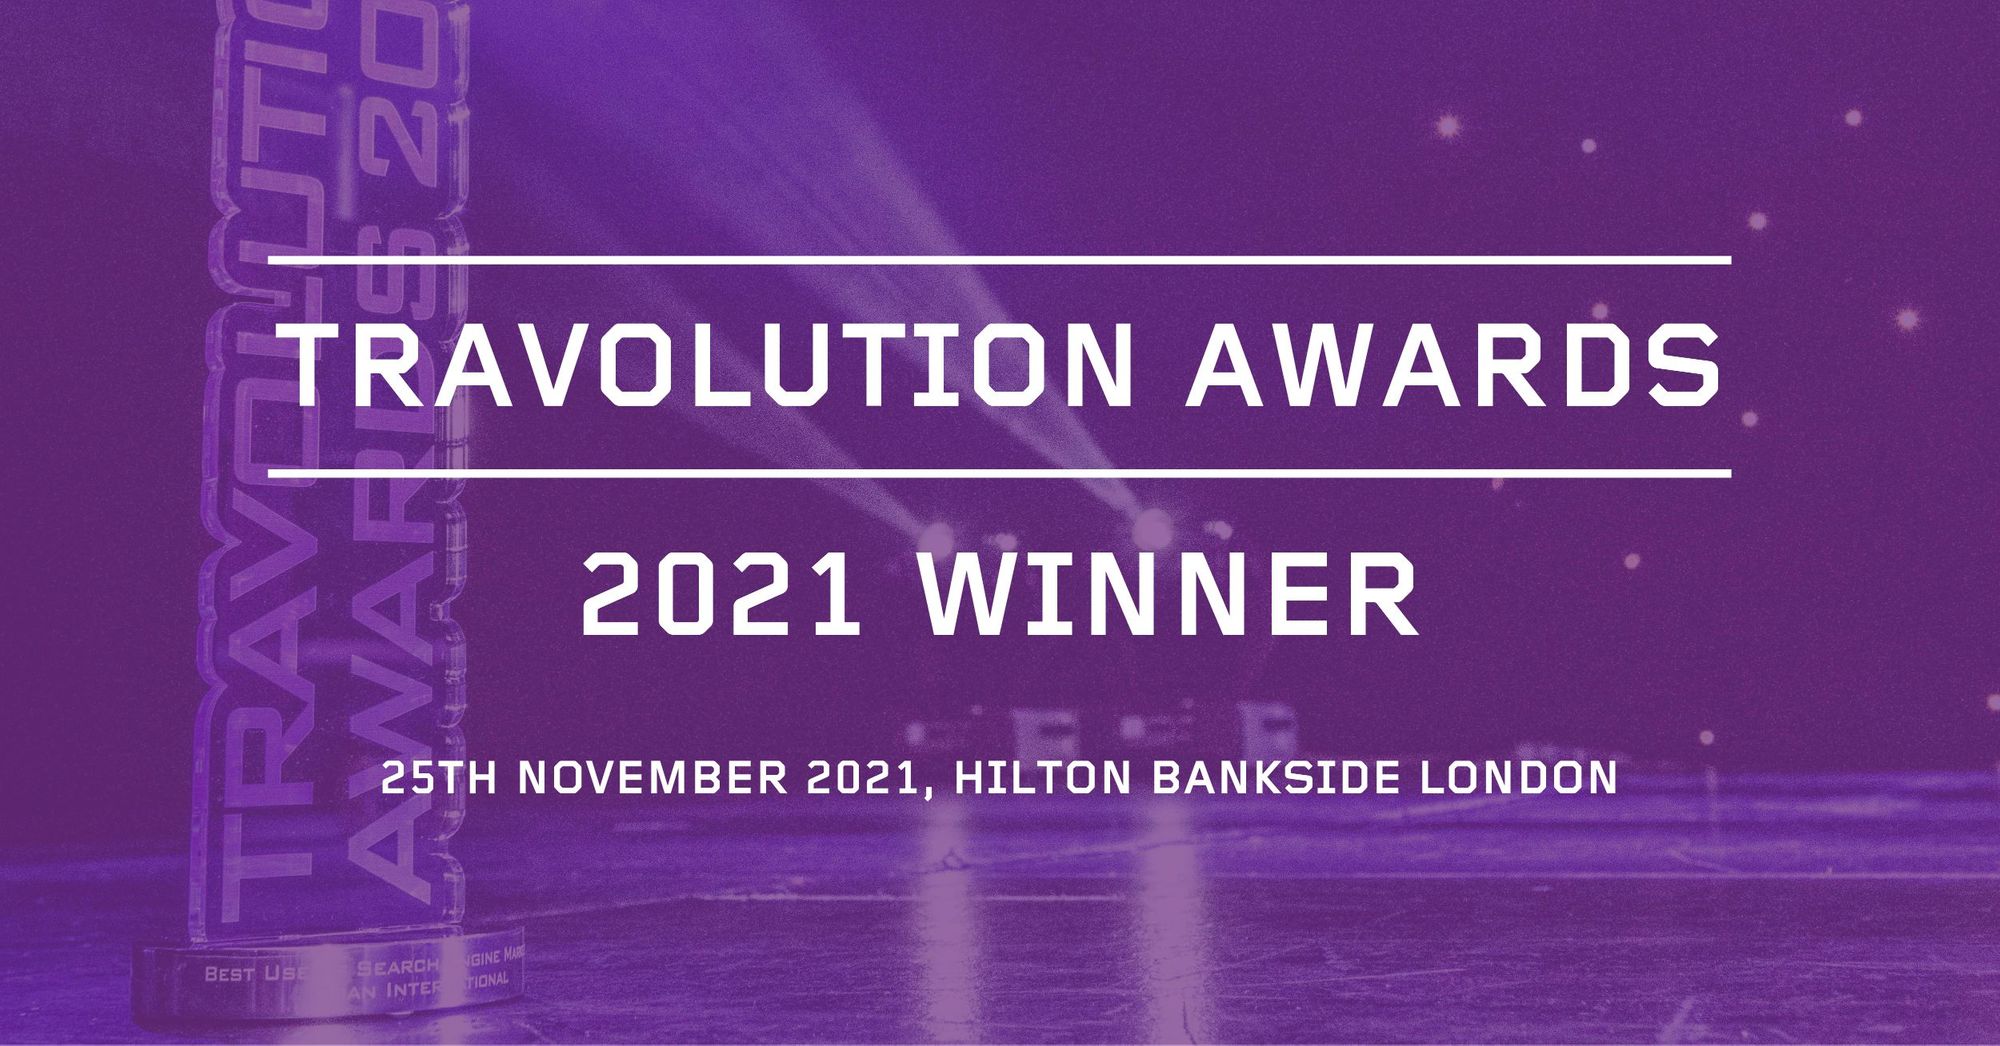 Much Better Adventures won the Travolution Award for best travel agency for 2021 